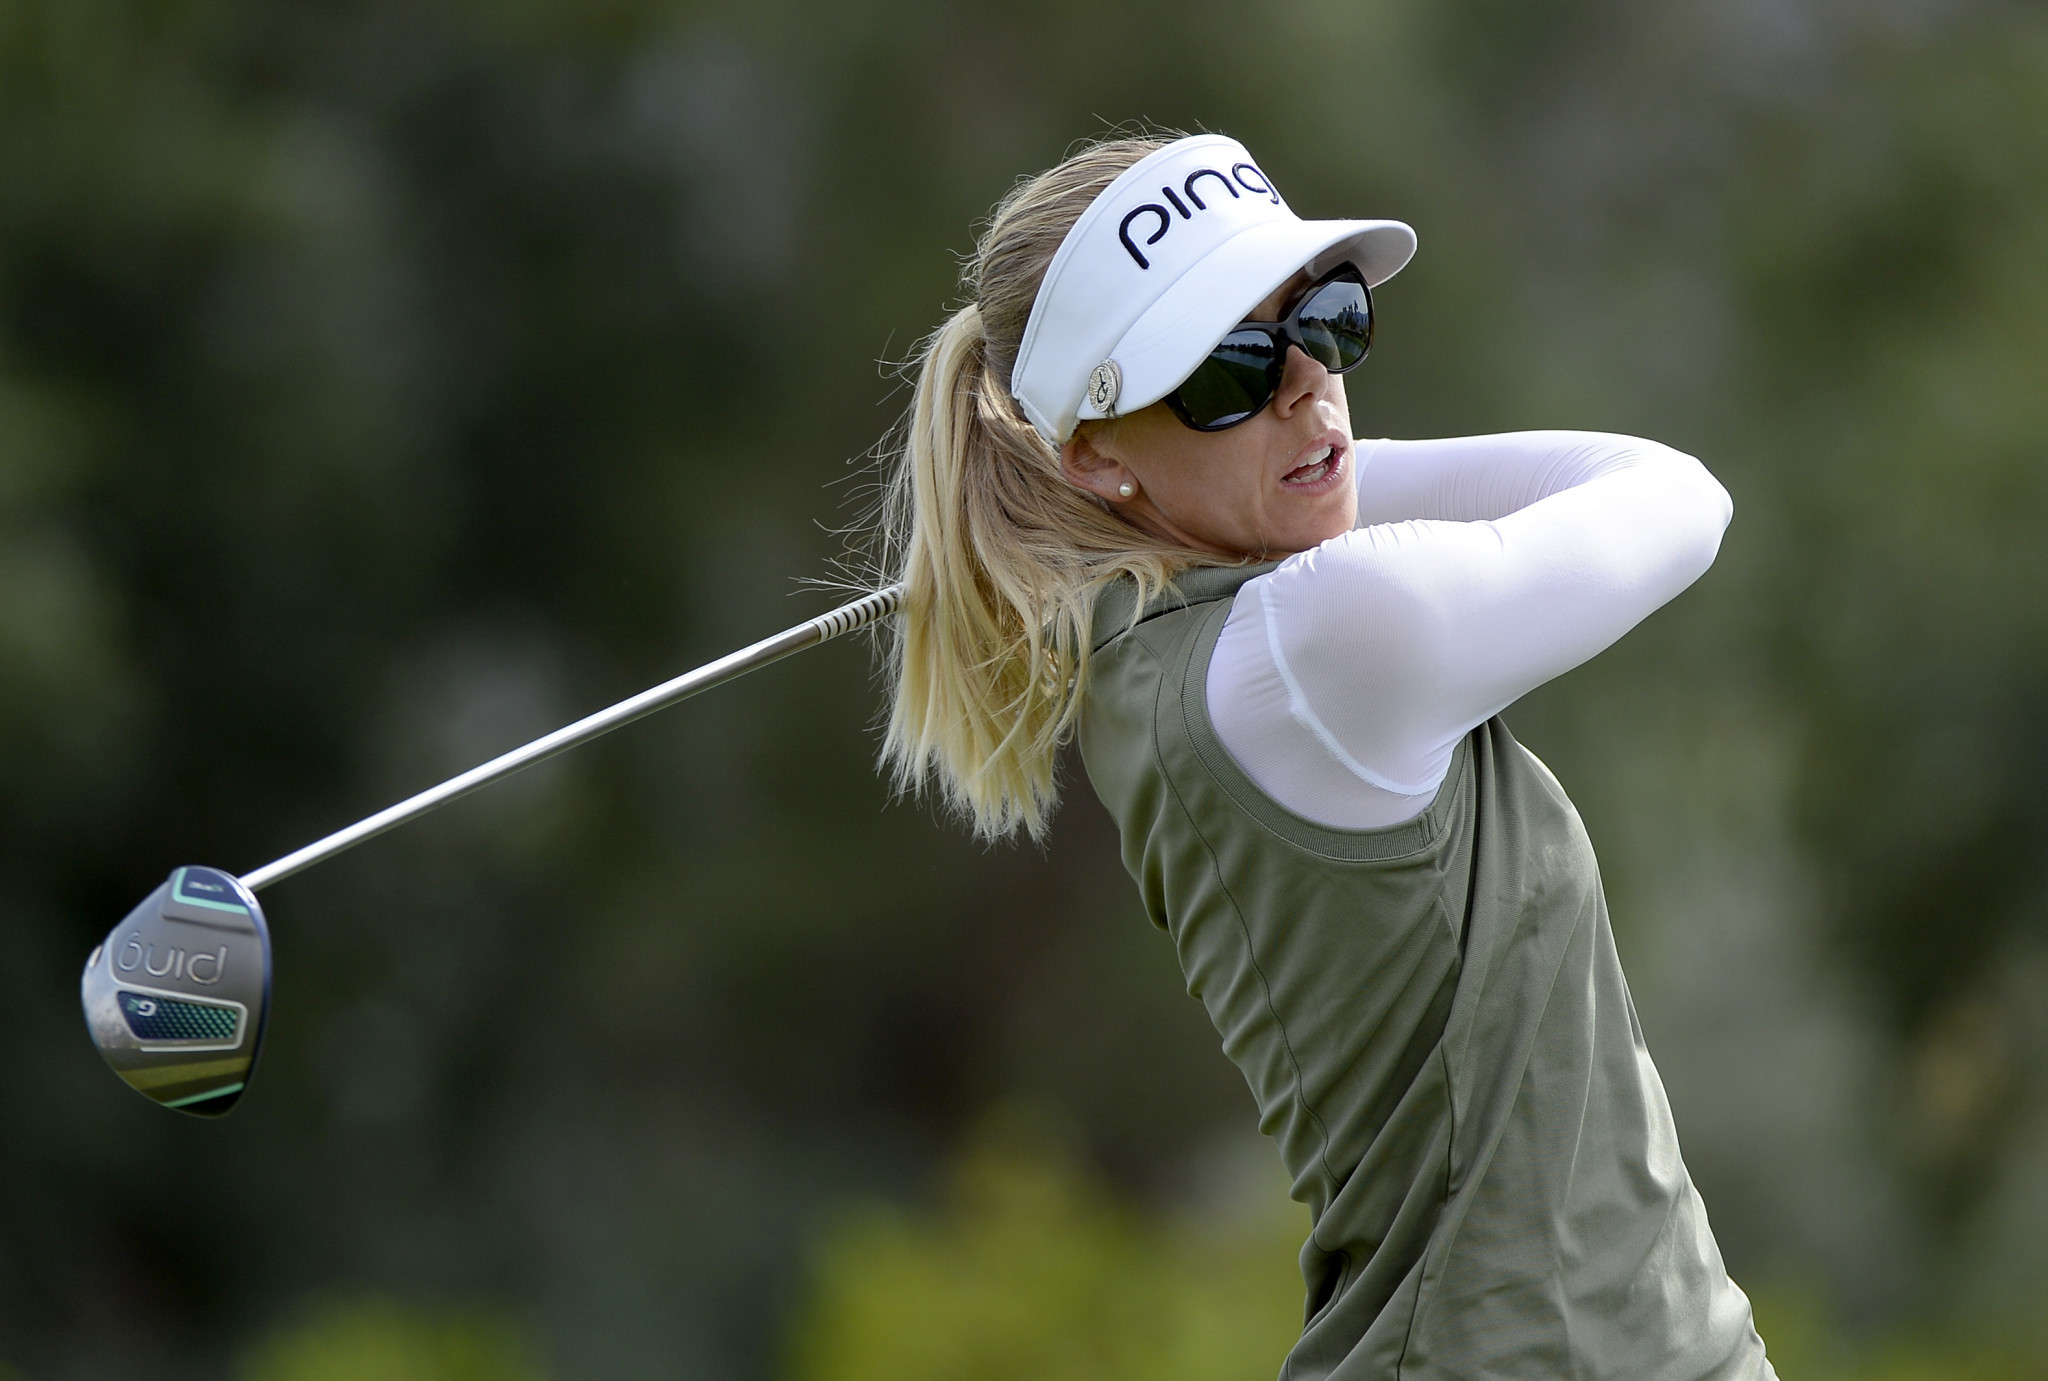 Sweden's Pernilla Lindberg will hope to clinch her first major title ©Getty Images